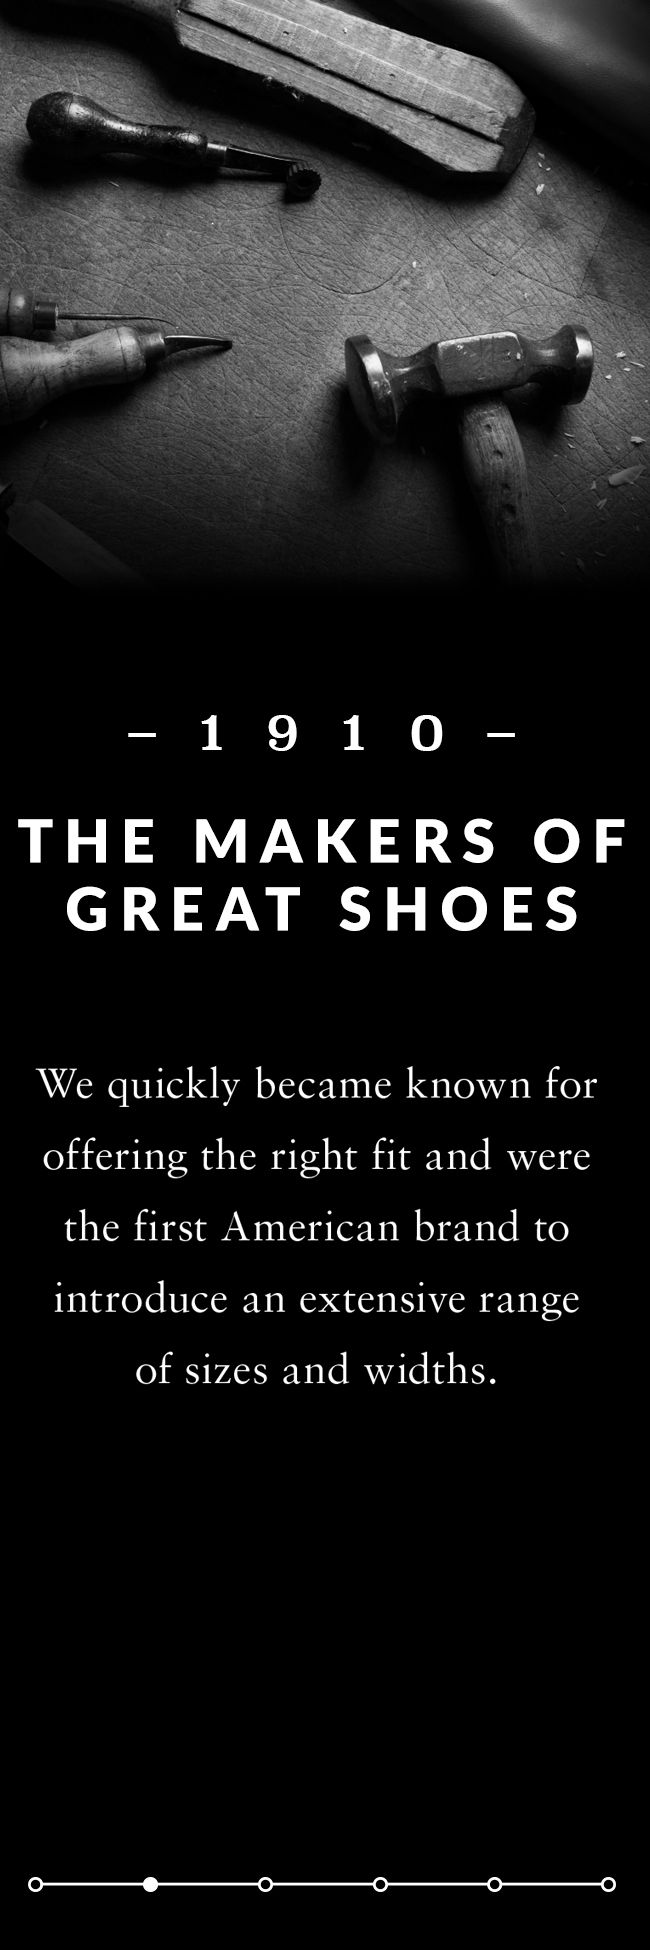 The makers of great shoes